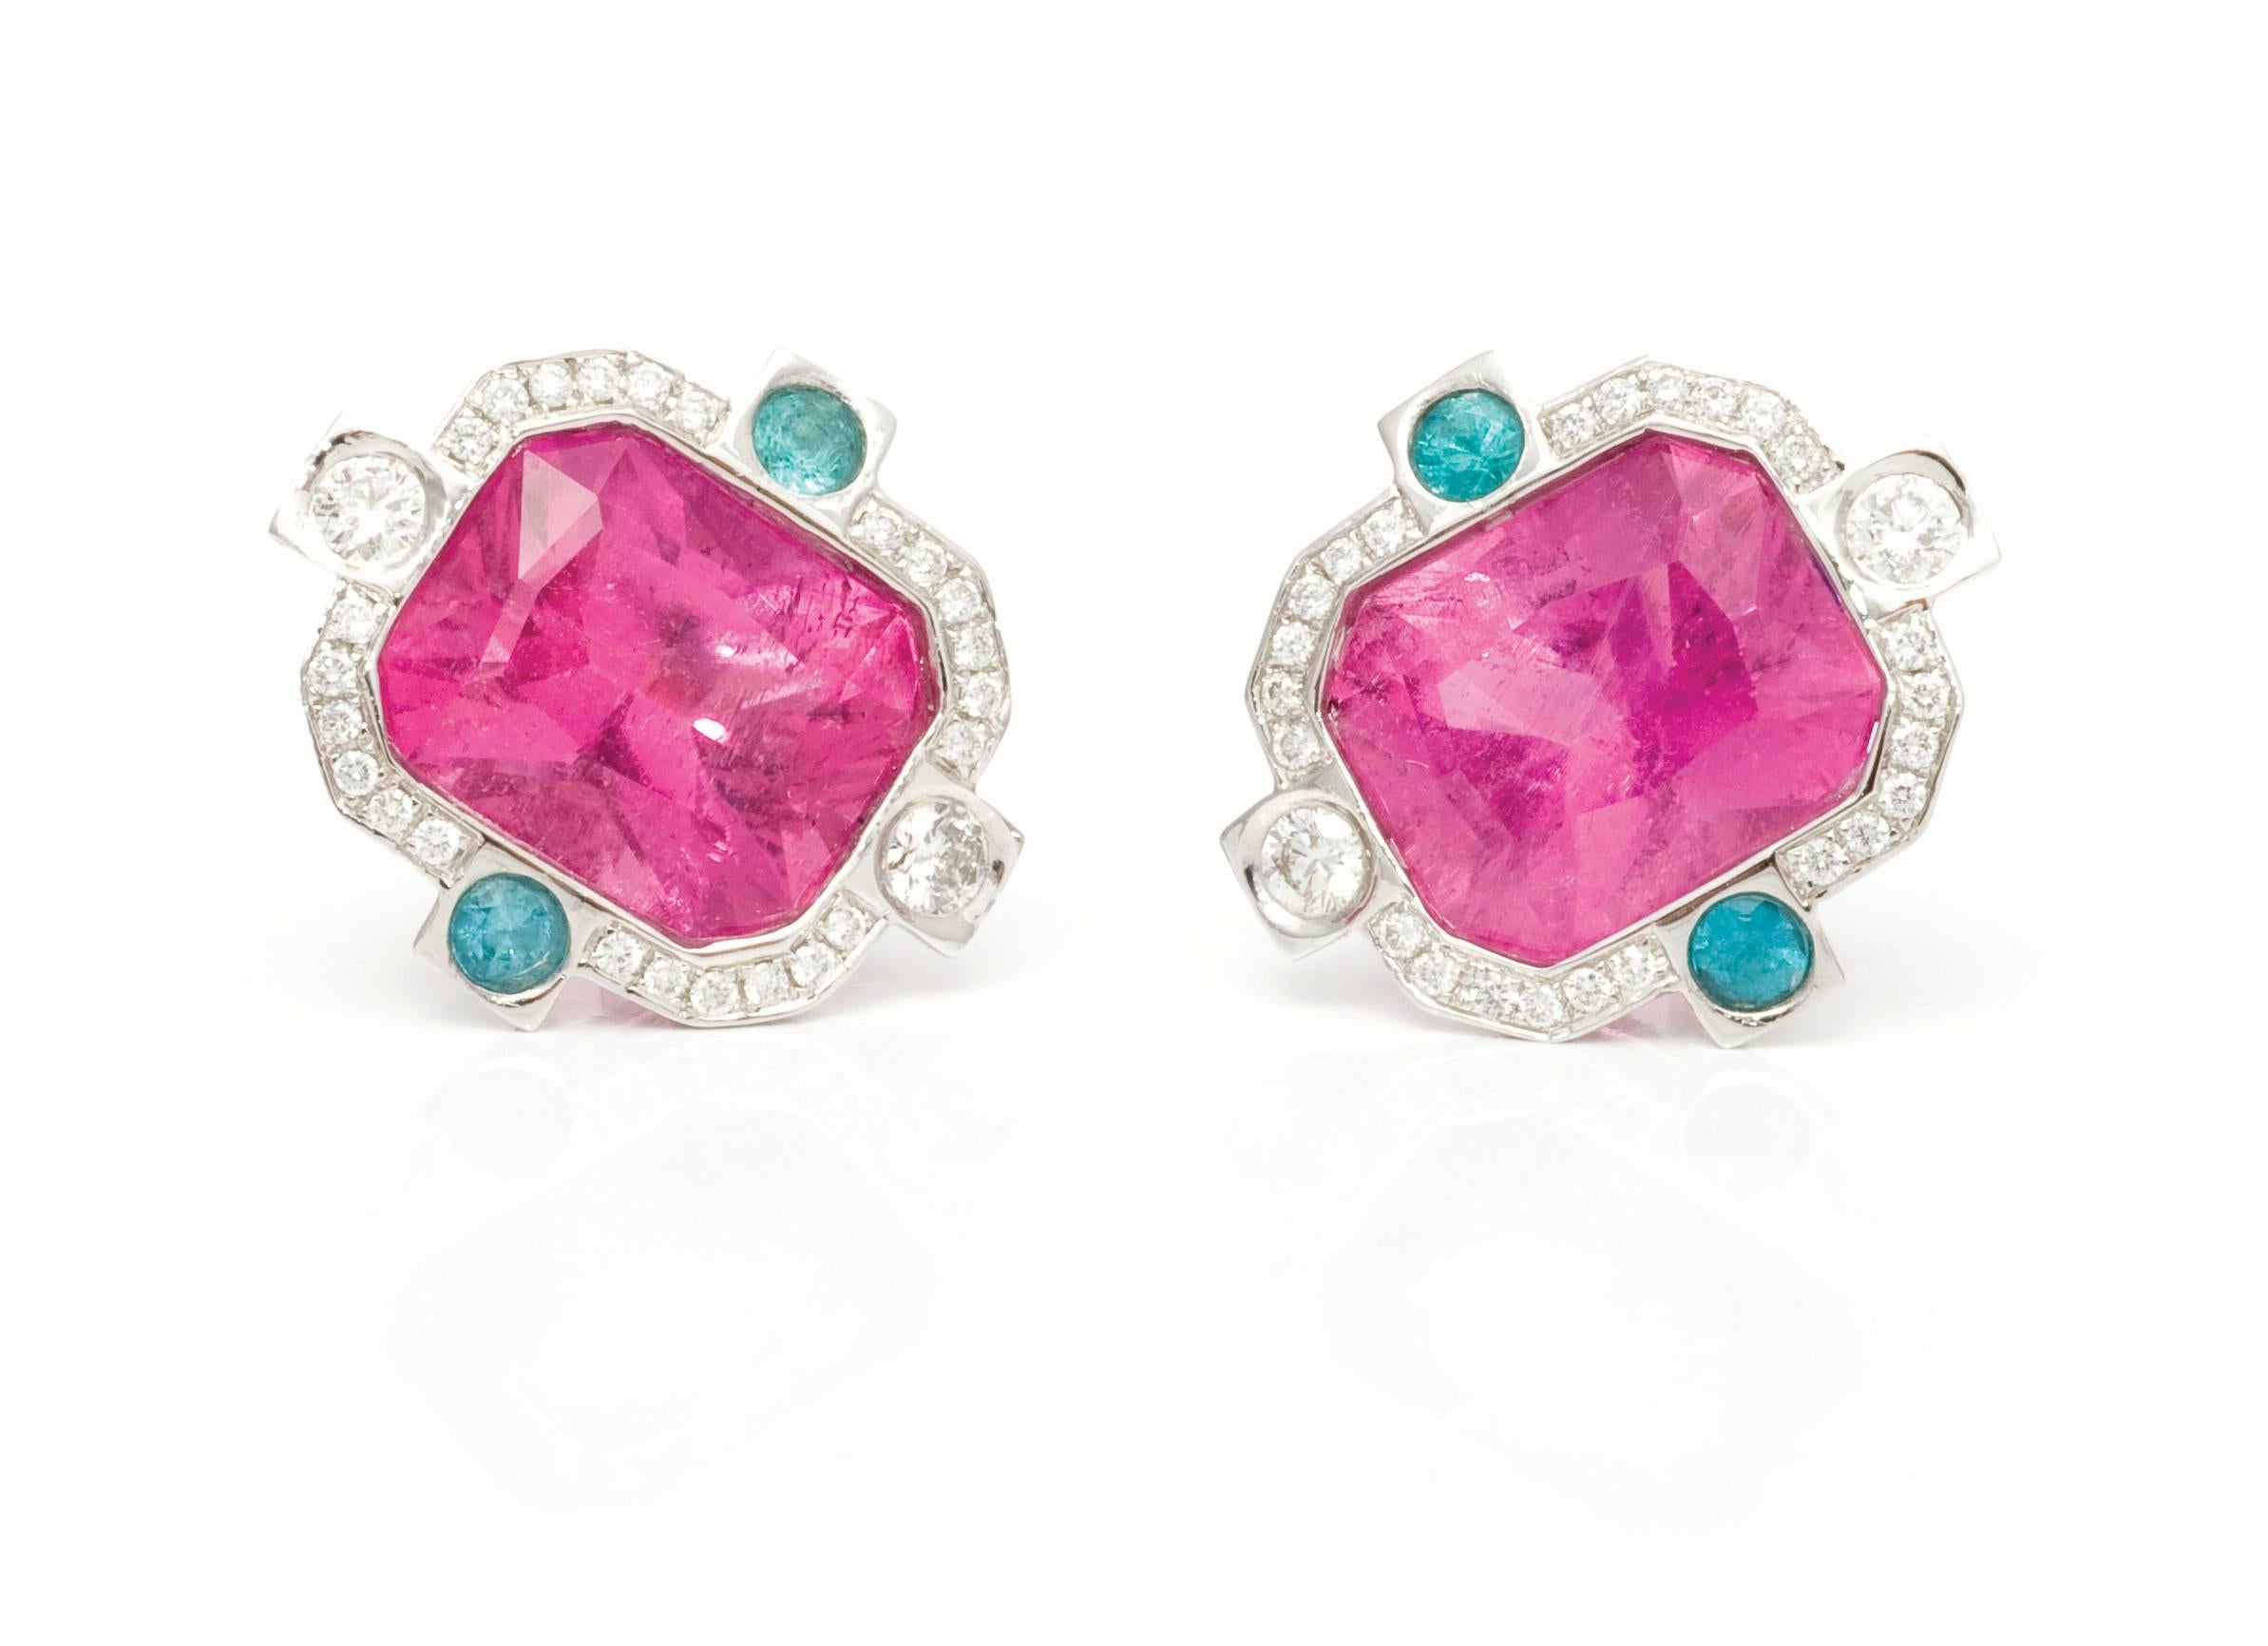 Spectacular matching hot pink emerald cut Rubellites with contrasting neon turquoise Paraiba tourmalines and white diamonds

Gemstone weight:
2 Rubellite tourmalines: 8.33 cts 
4 Paraiba tourmalines: 0.41 ct
204 VS brilliant diamonds: